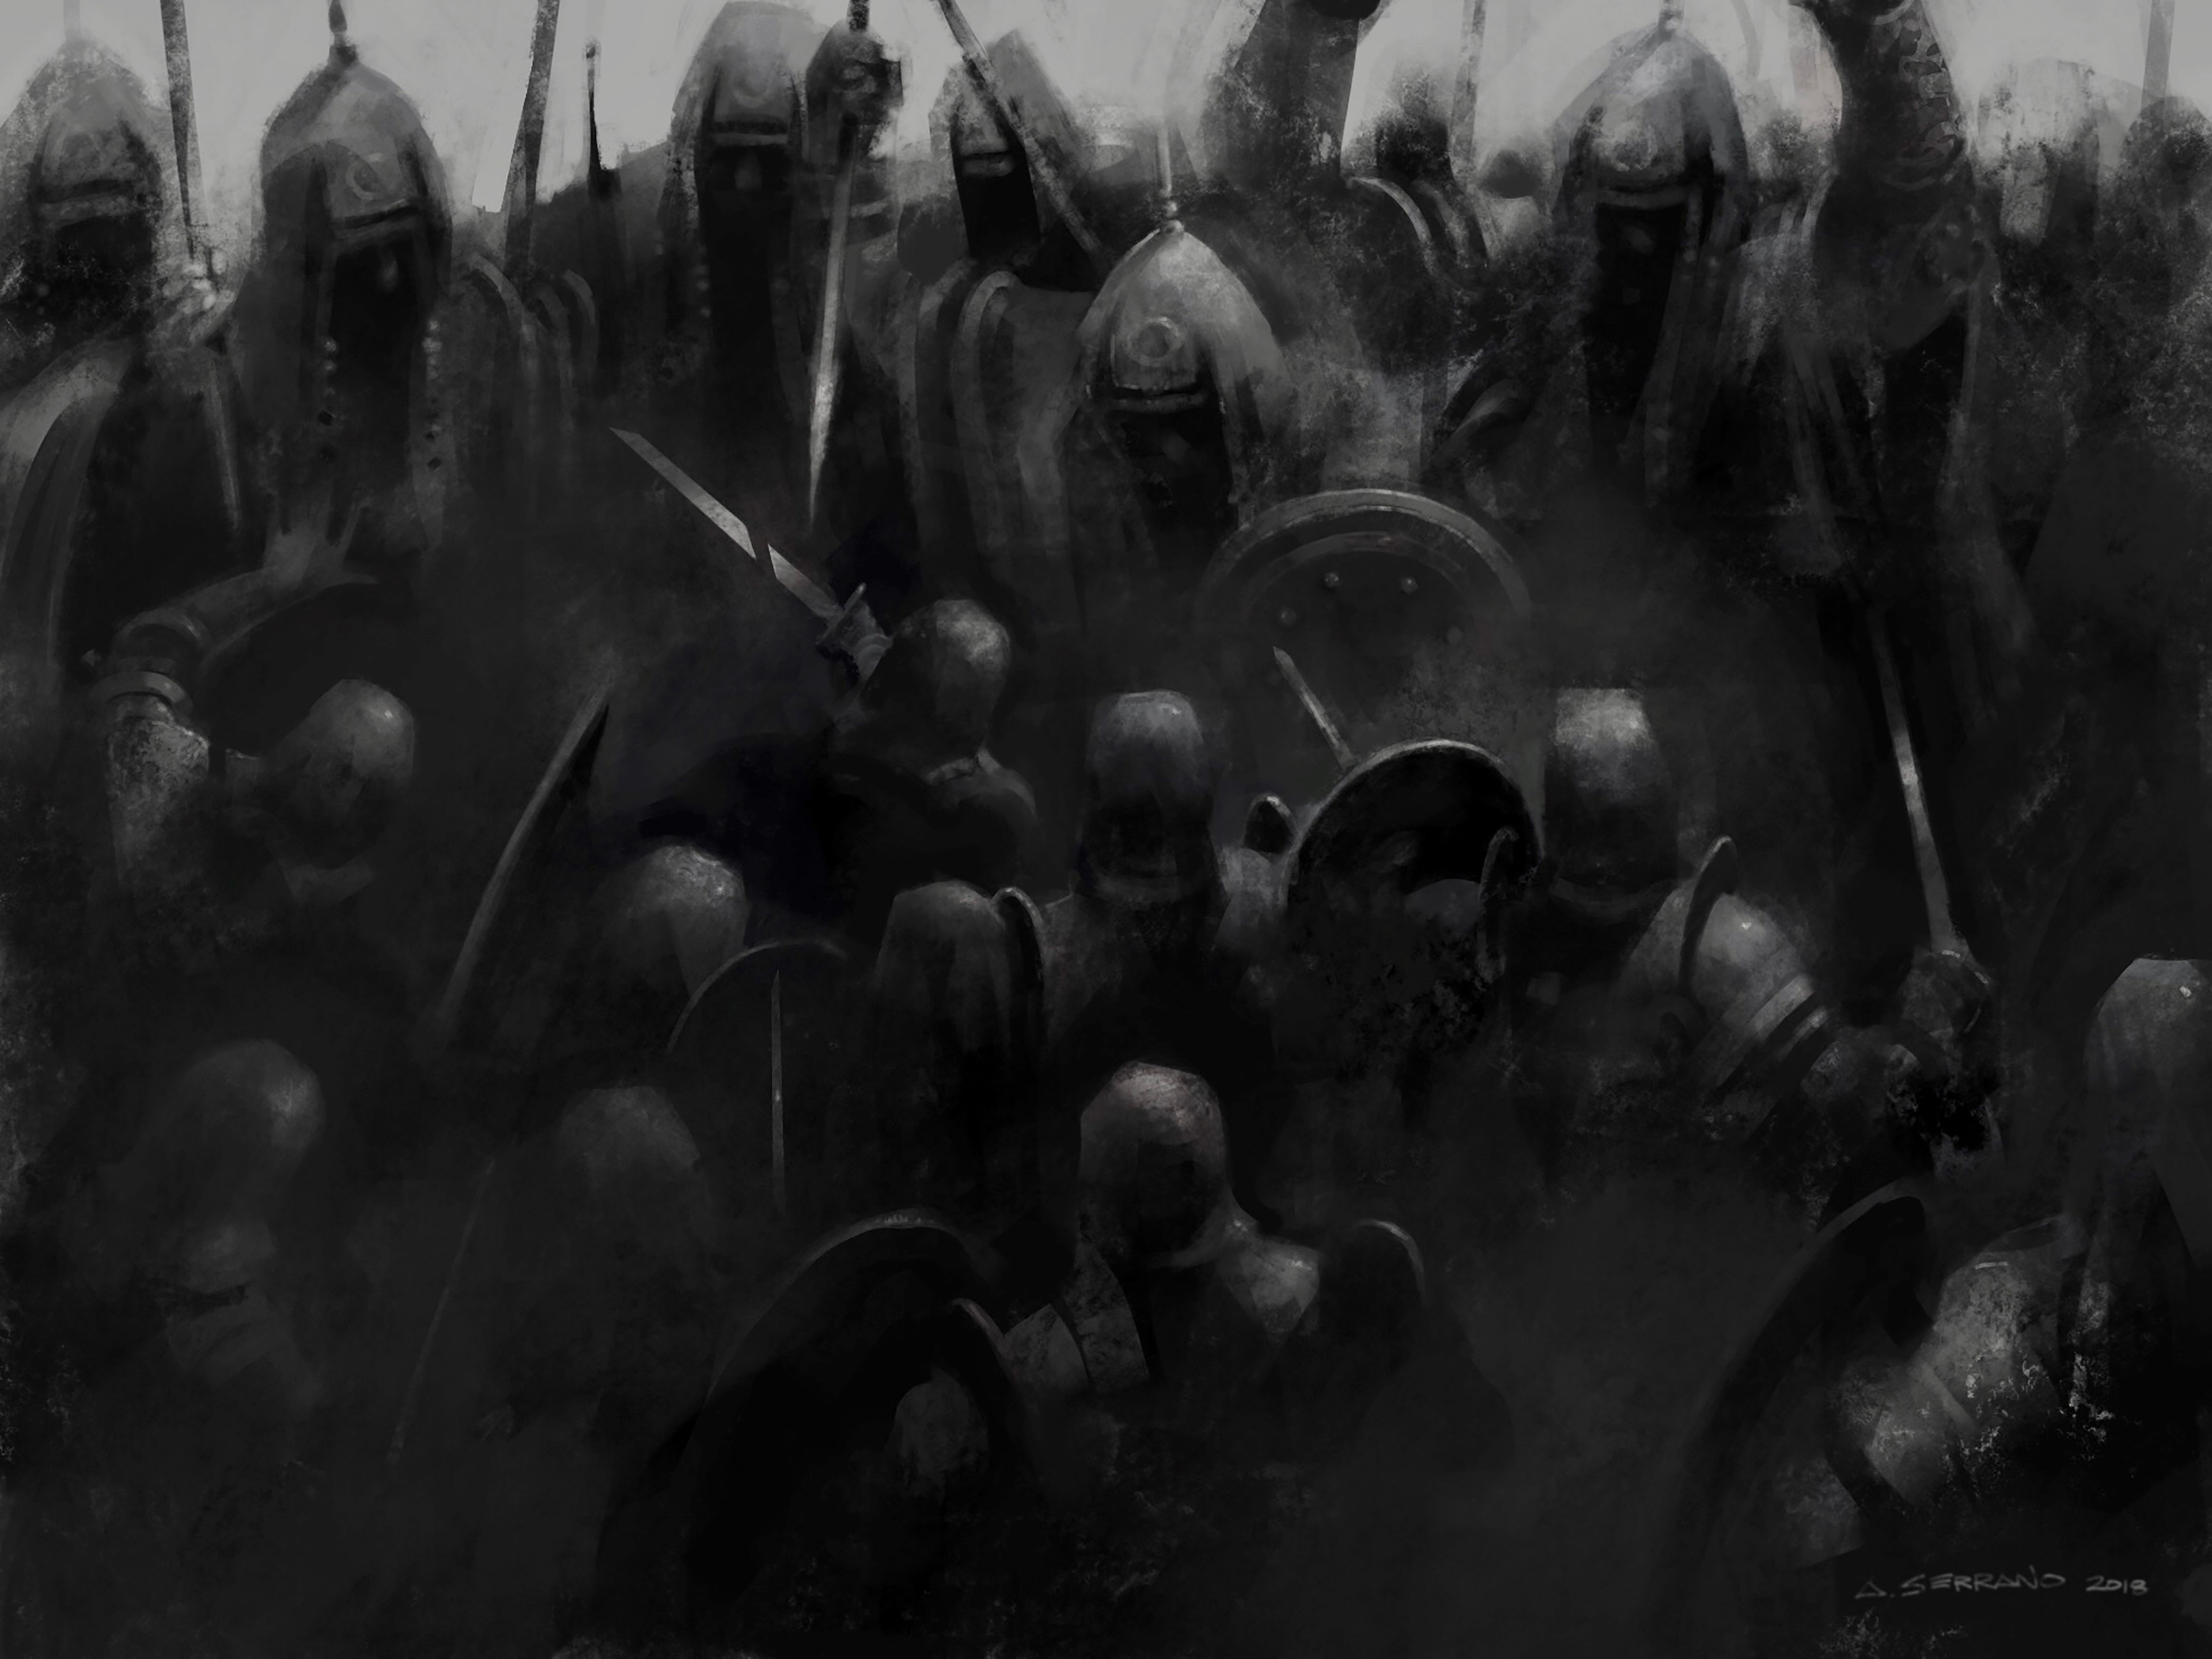 iPad painting: Stand Against The Giants